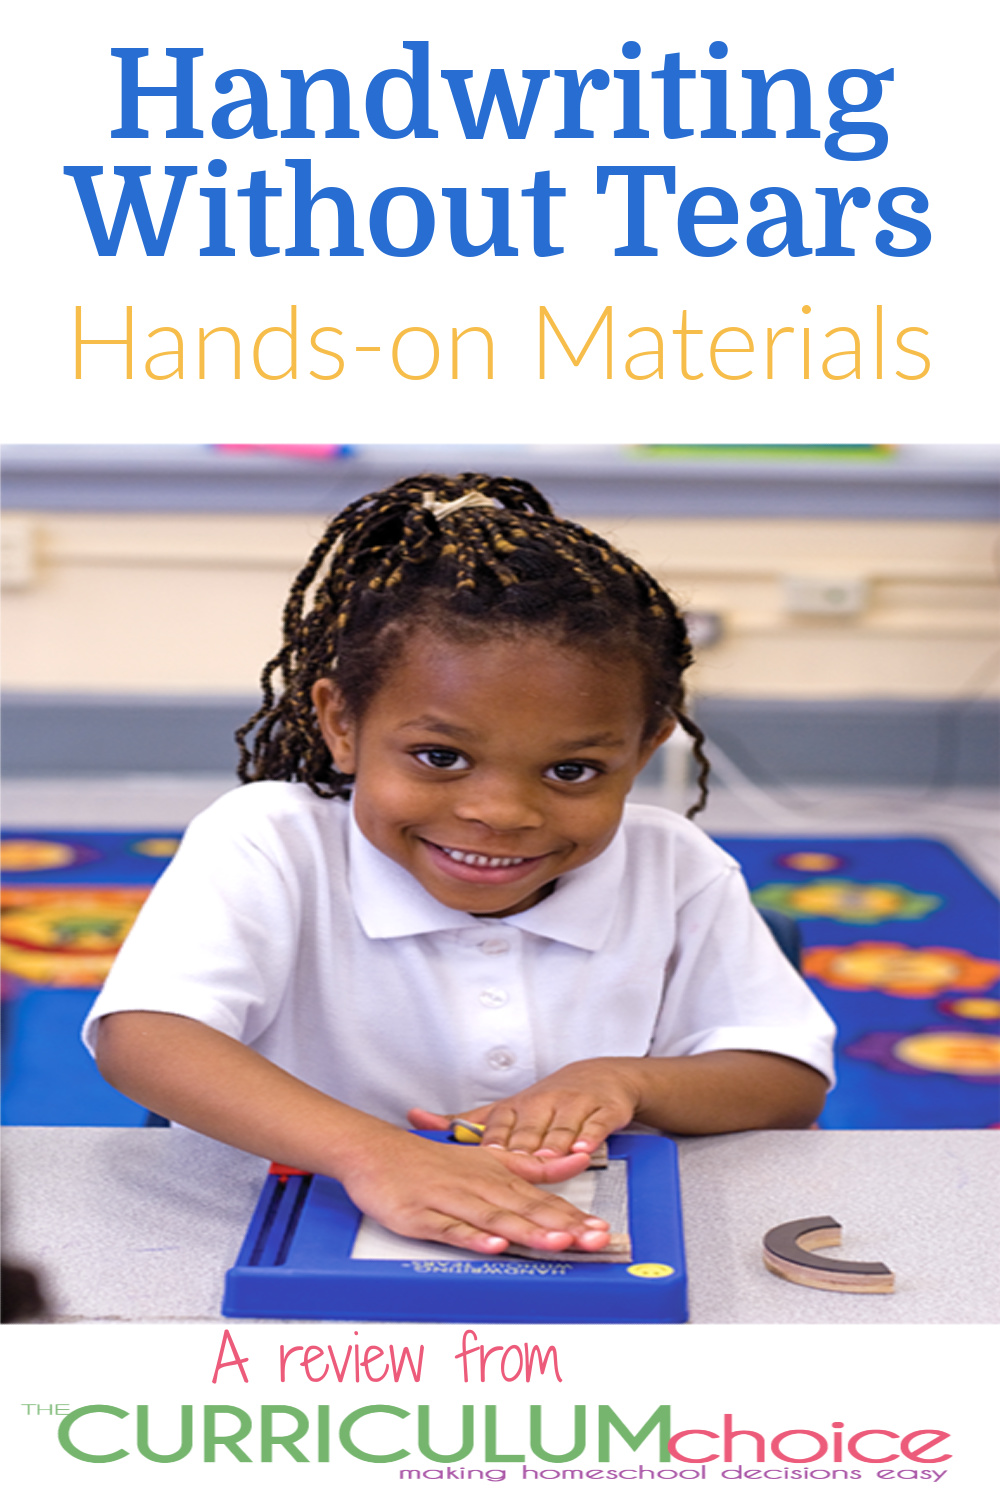 Handwriting Without Tears Hands-on Materials are great for tactile and visual learners to begin forming letters and numbers. A review from The Curriculum Choice